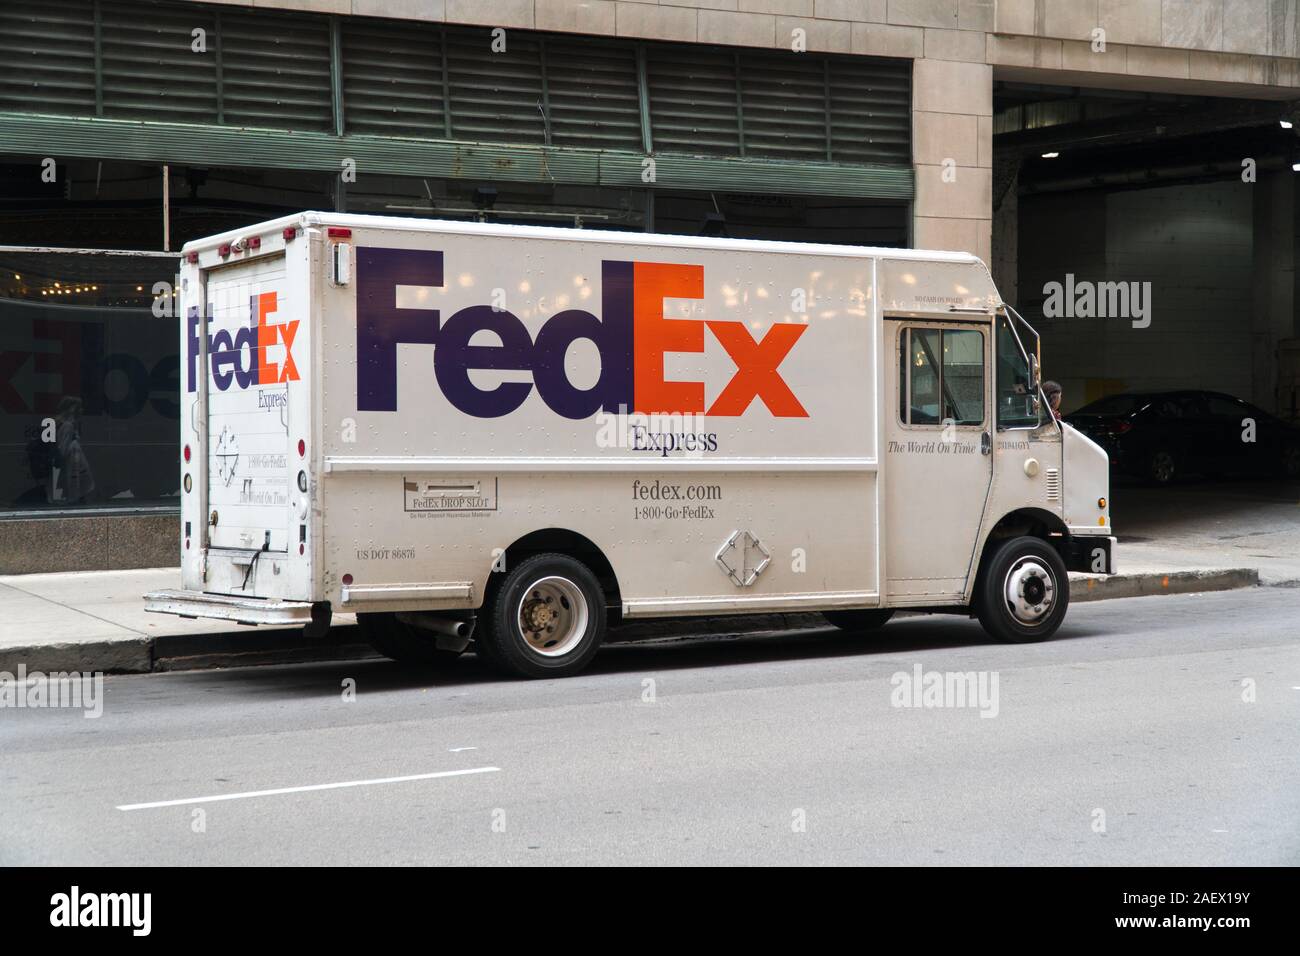 Chicago, USA - Circa 2019: Fedex express truck parked on city roadside making deliveries to office buildings Stock Photo